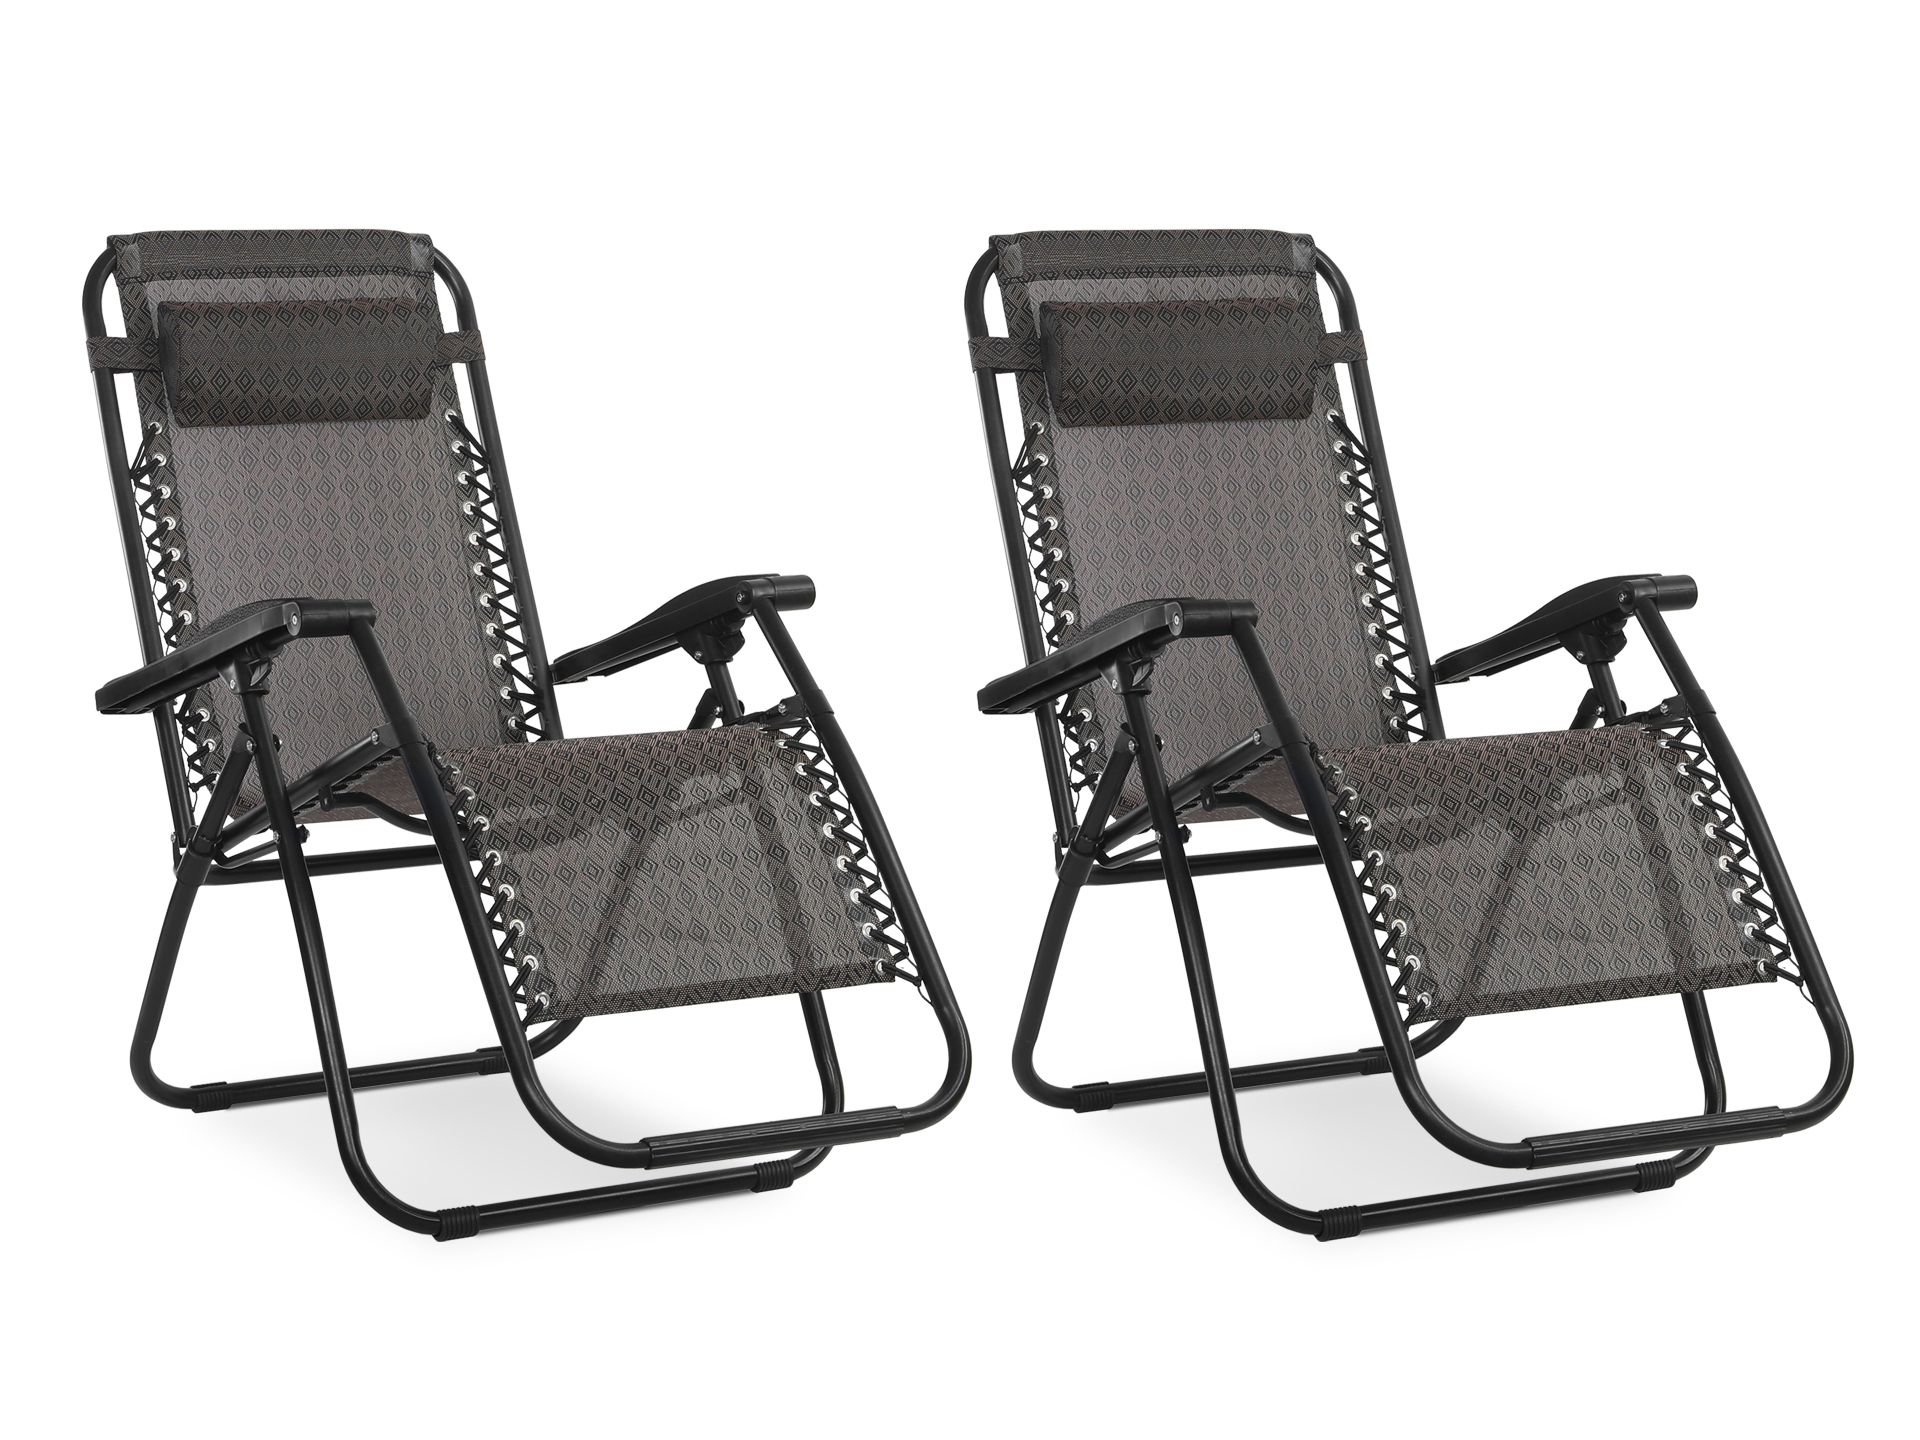 Outdoor Camping Chair Sun Lounger - Set of 2 - Brown